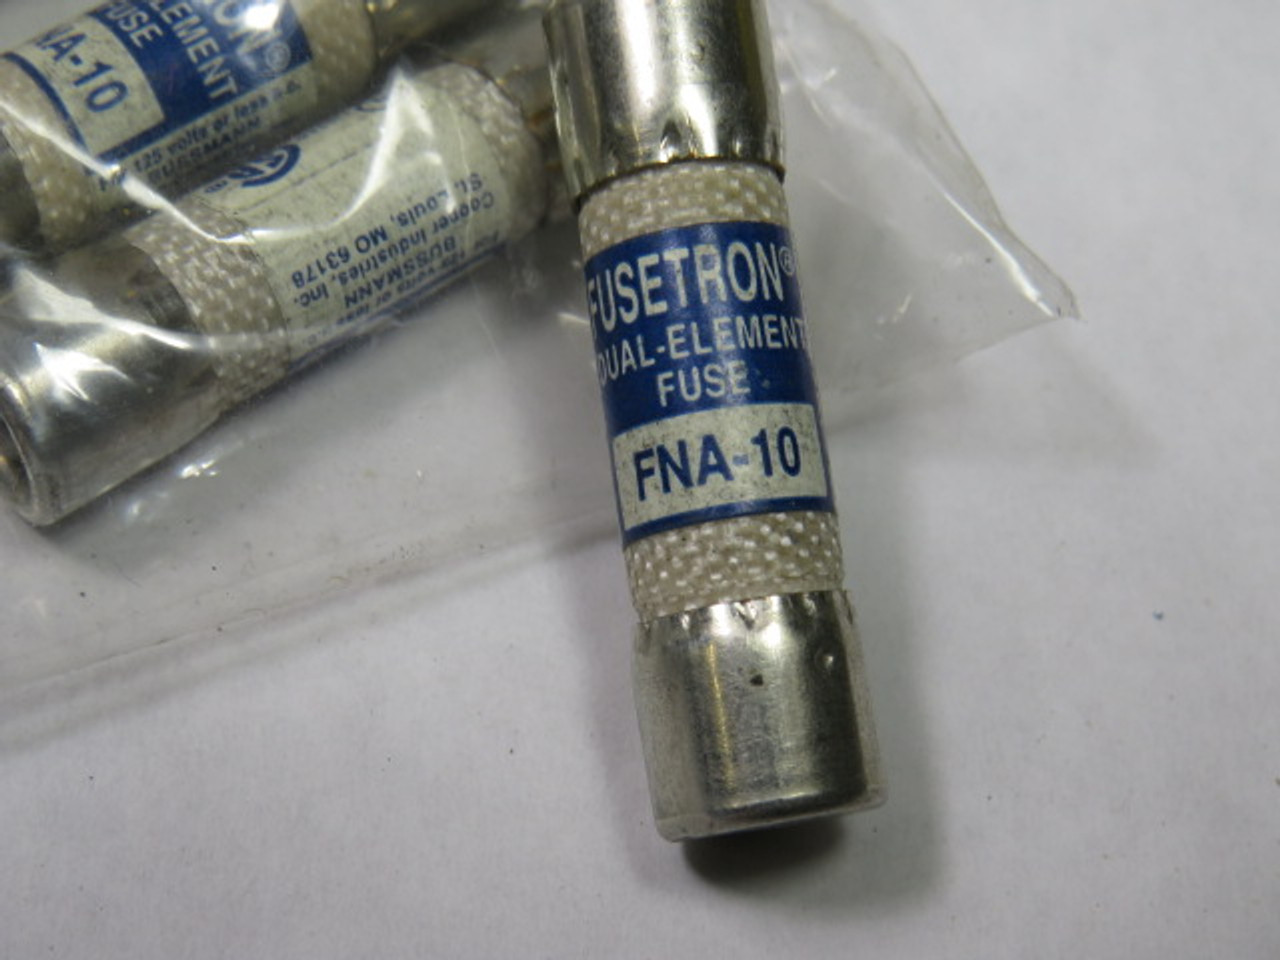 Fusetron FNA-10 Dual Element Fuse 10A 125V Lot of 10 USED